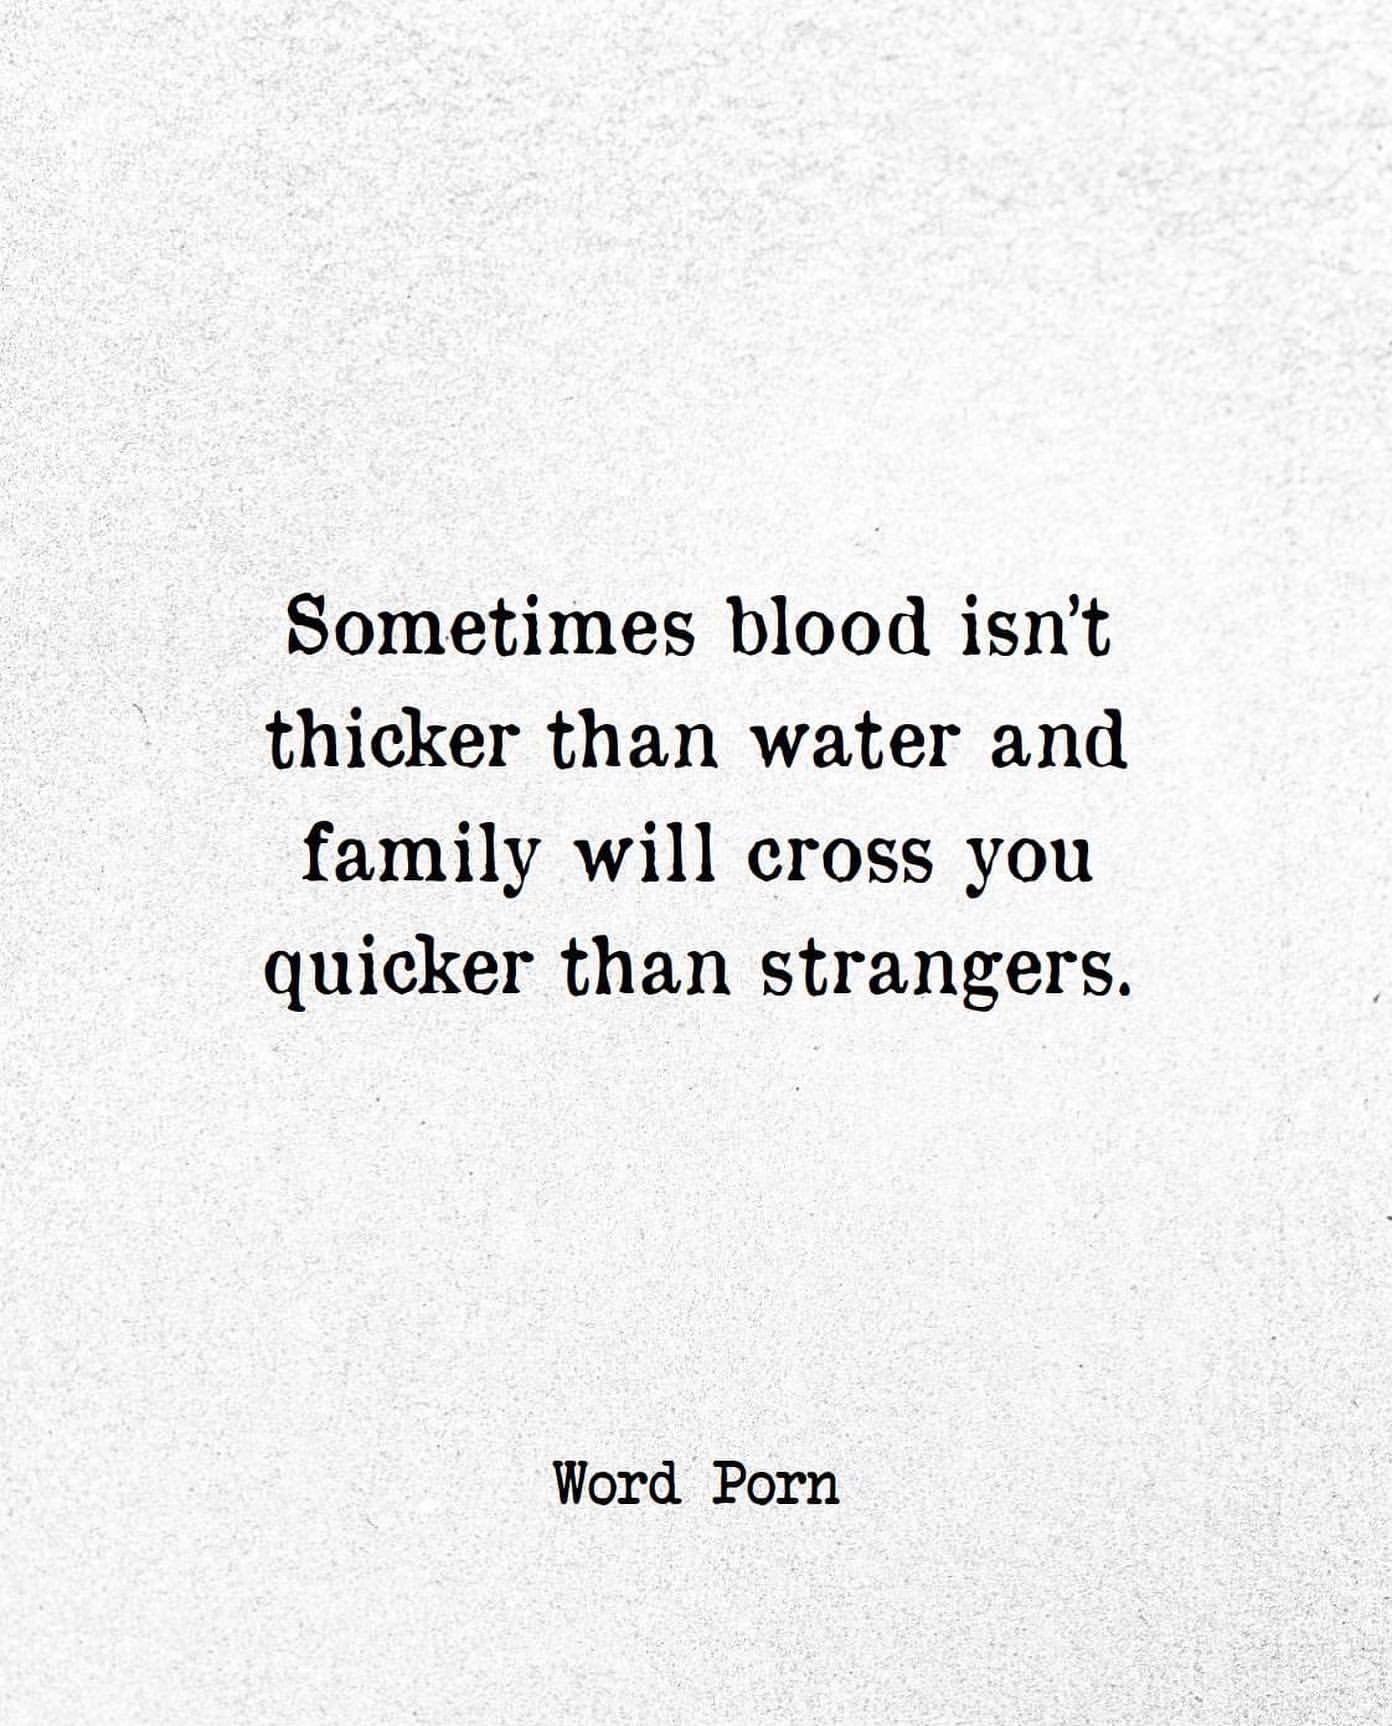 Sometimes blood isn't thicker than water and family will cross you quicker than strangers.